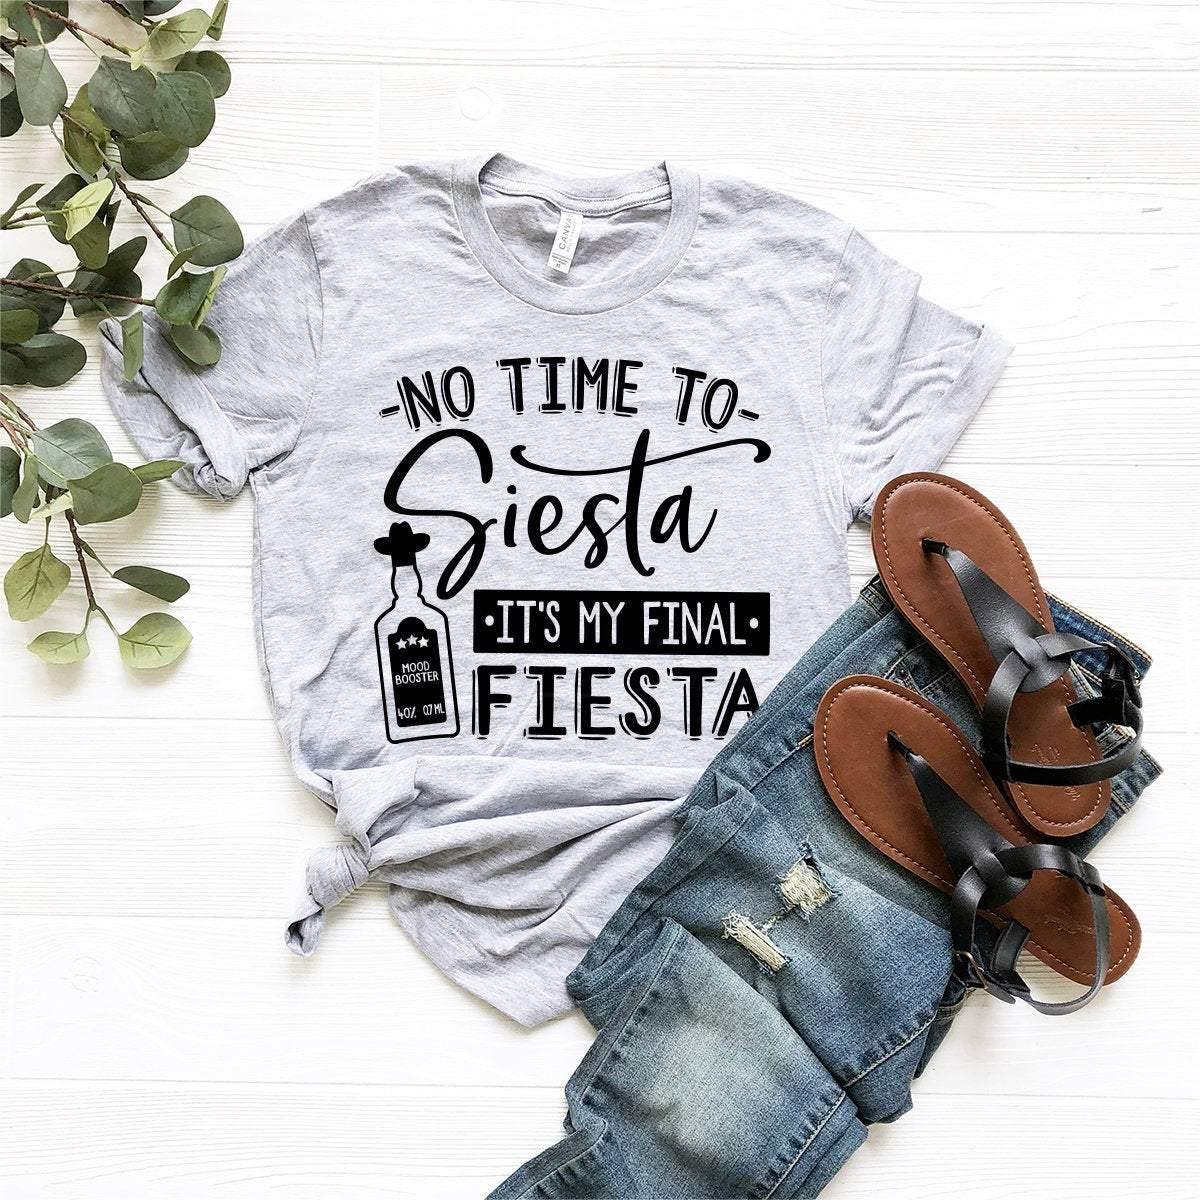 Tequila Shirt, No Time To Siesta It's My Final Fiesta Shirt, Drinking Shirt, Drinking Friends Gift, Funny Drinking Shirt, Cinco De Mayo Tee - Fastdeliverytees.com